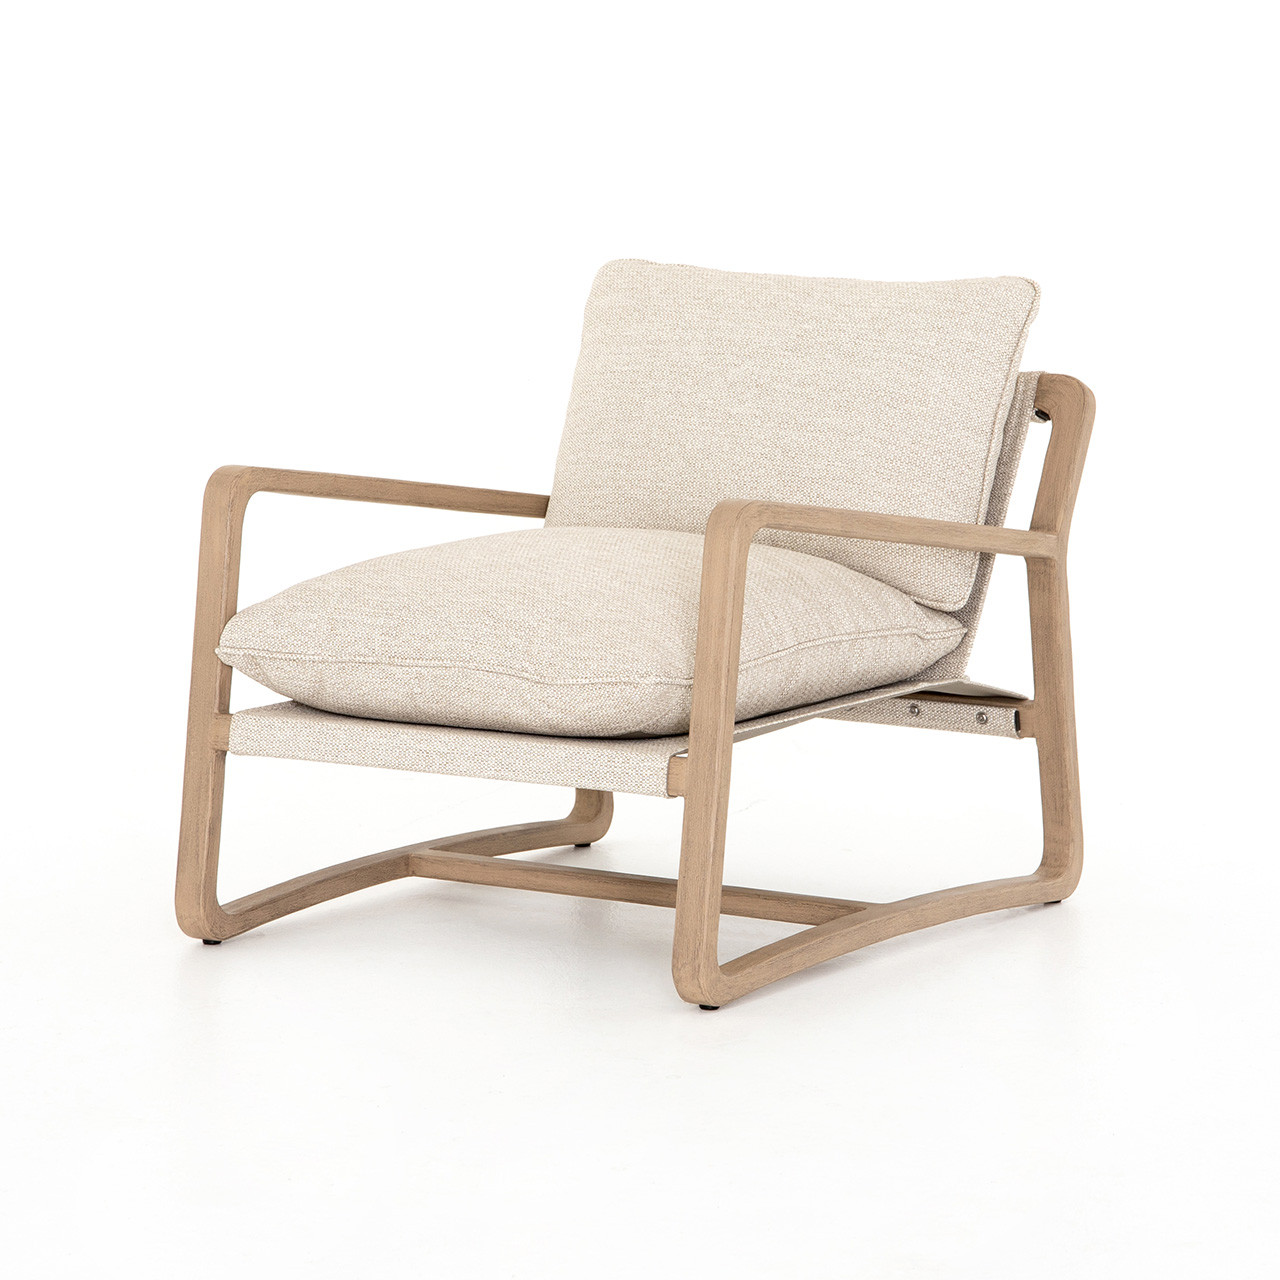 Sunset Cliffs Outdoor Lounge Chair - Washed Brown